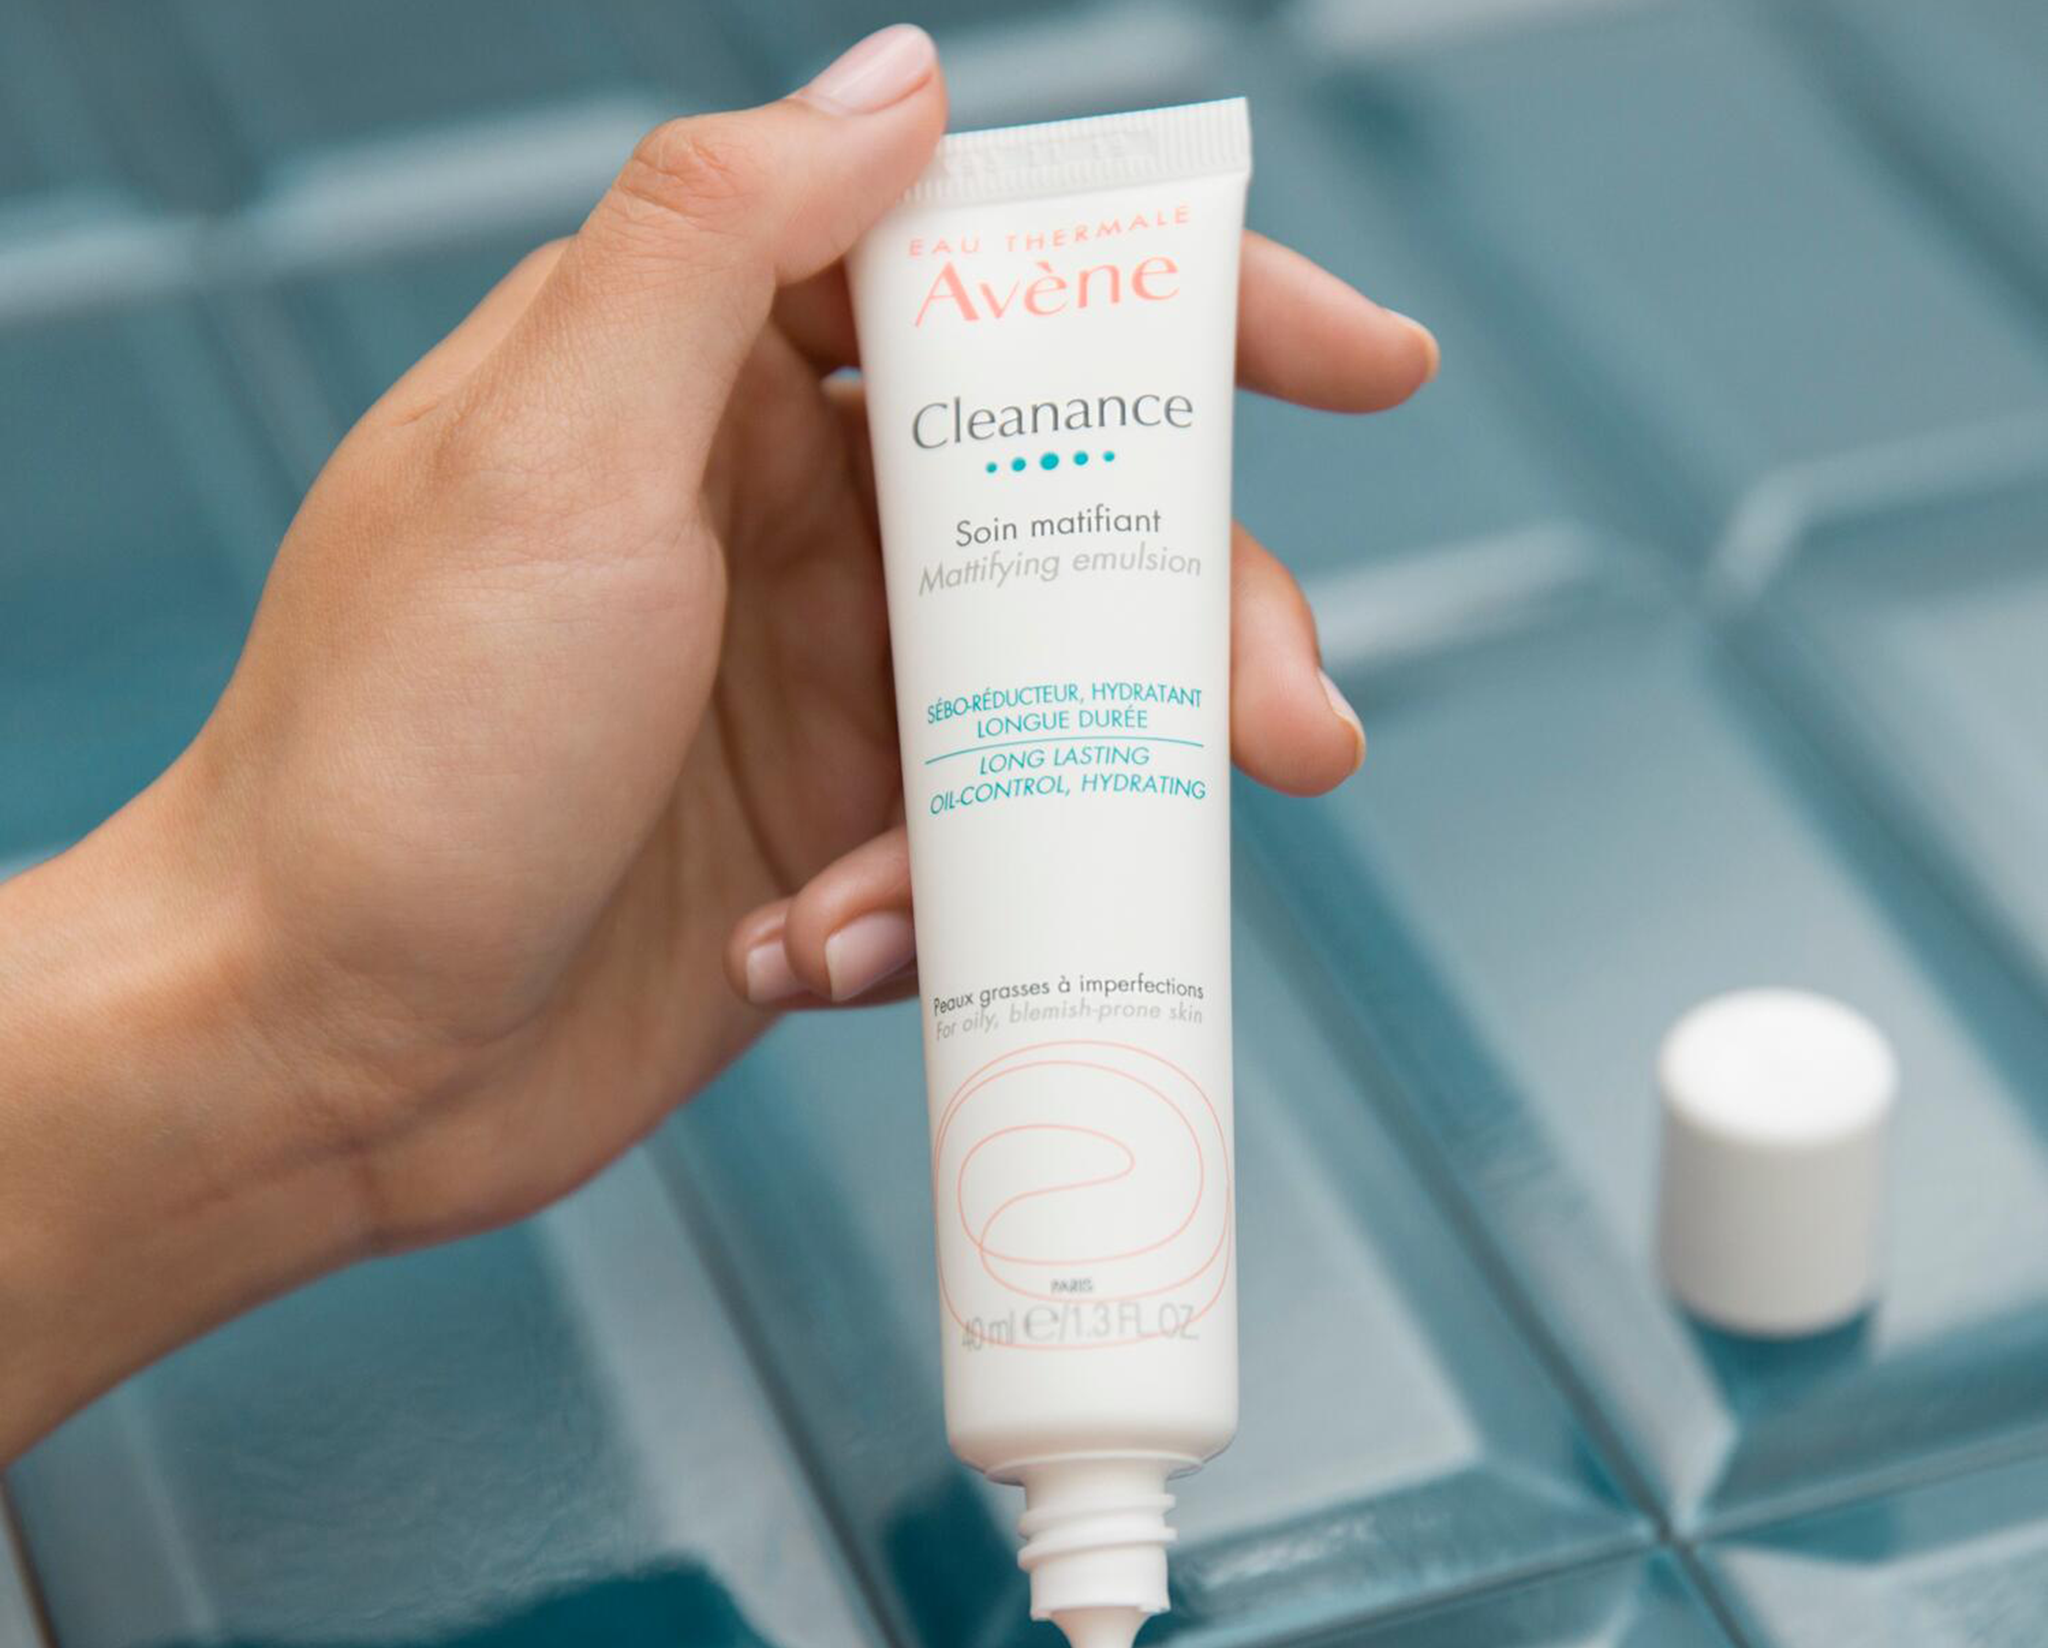 Do you want a smooth and well-groomed face? Choose Avène Cleanance Matte Face Emulsion